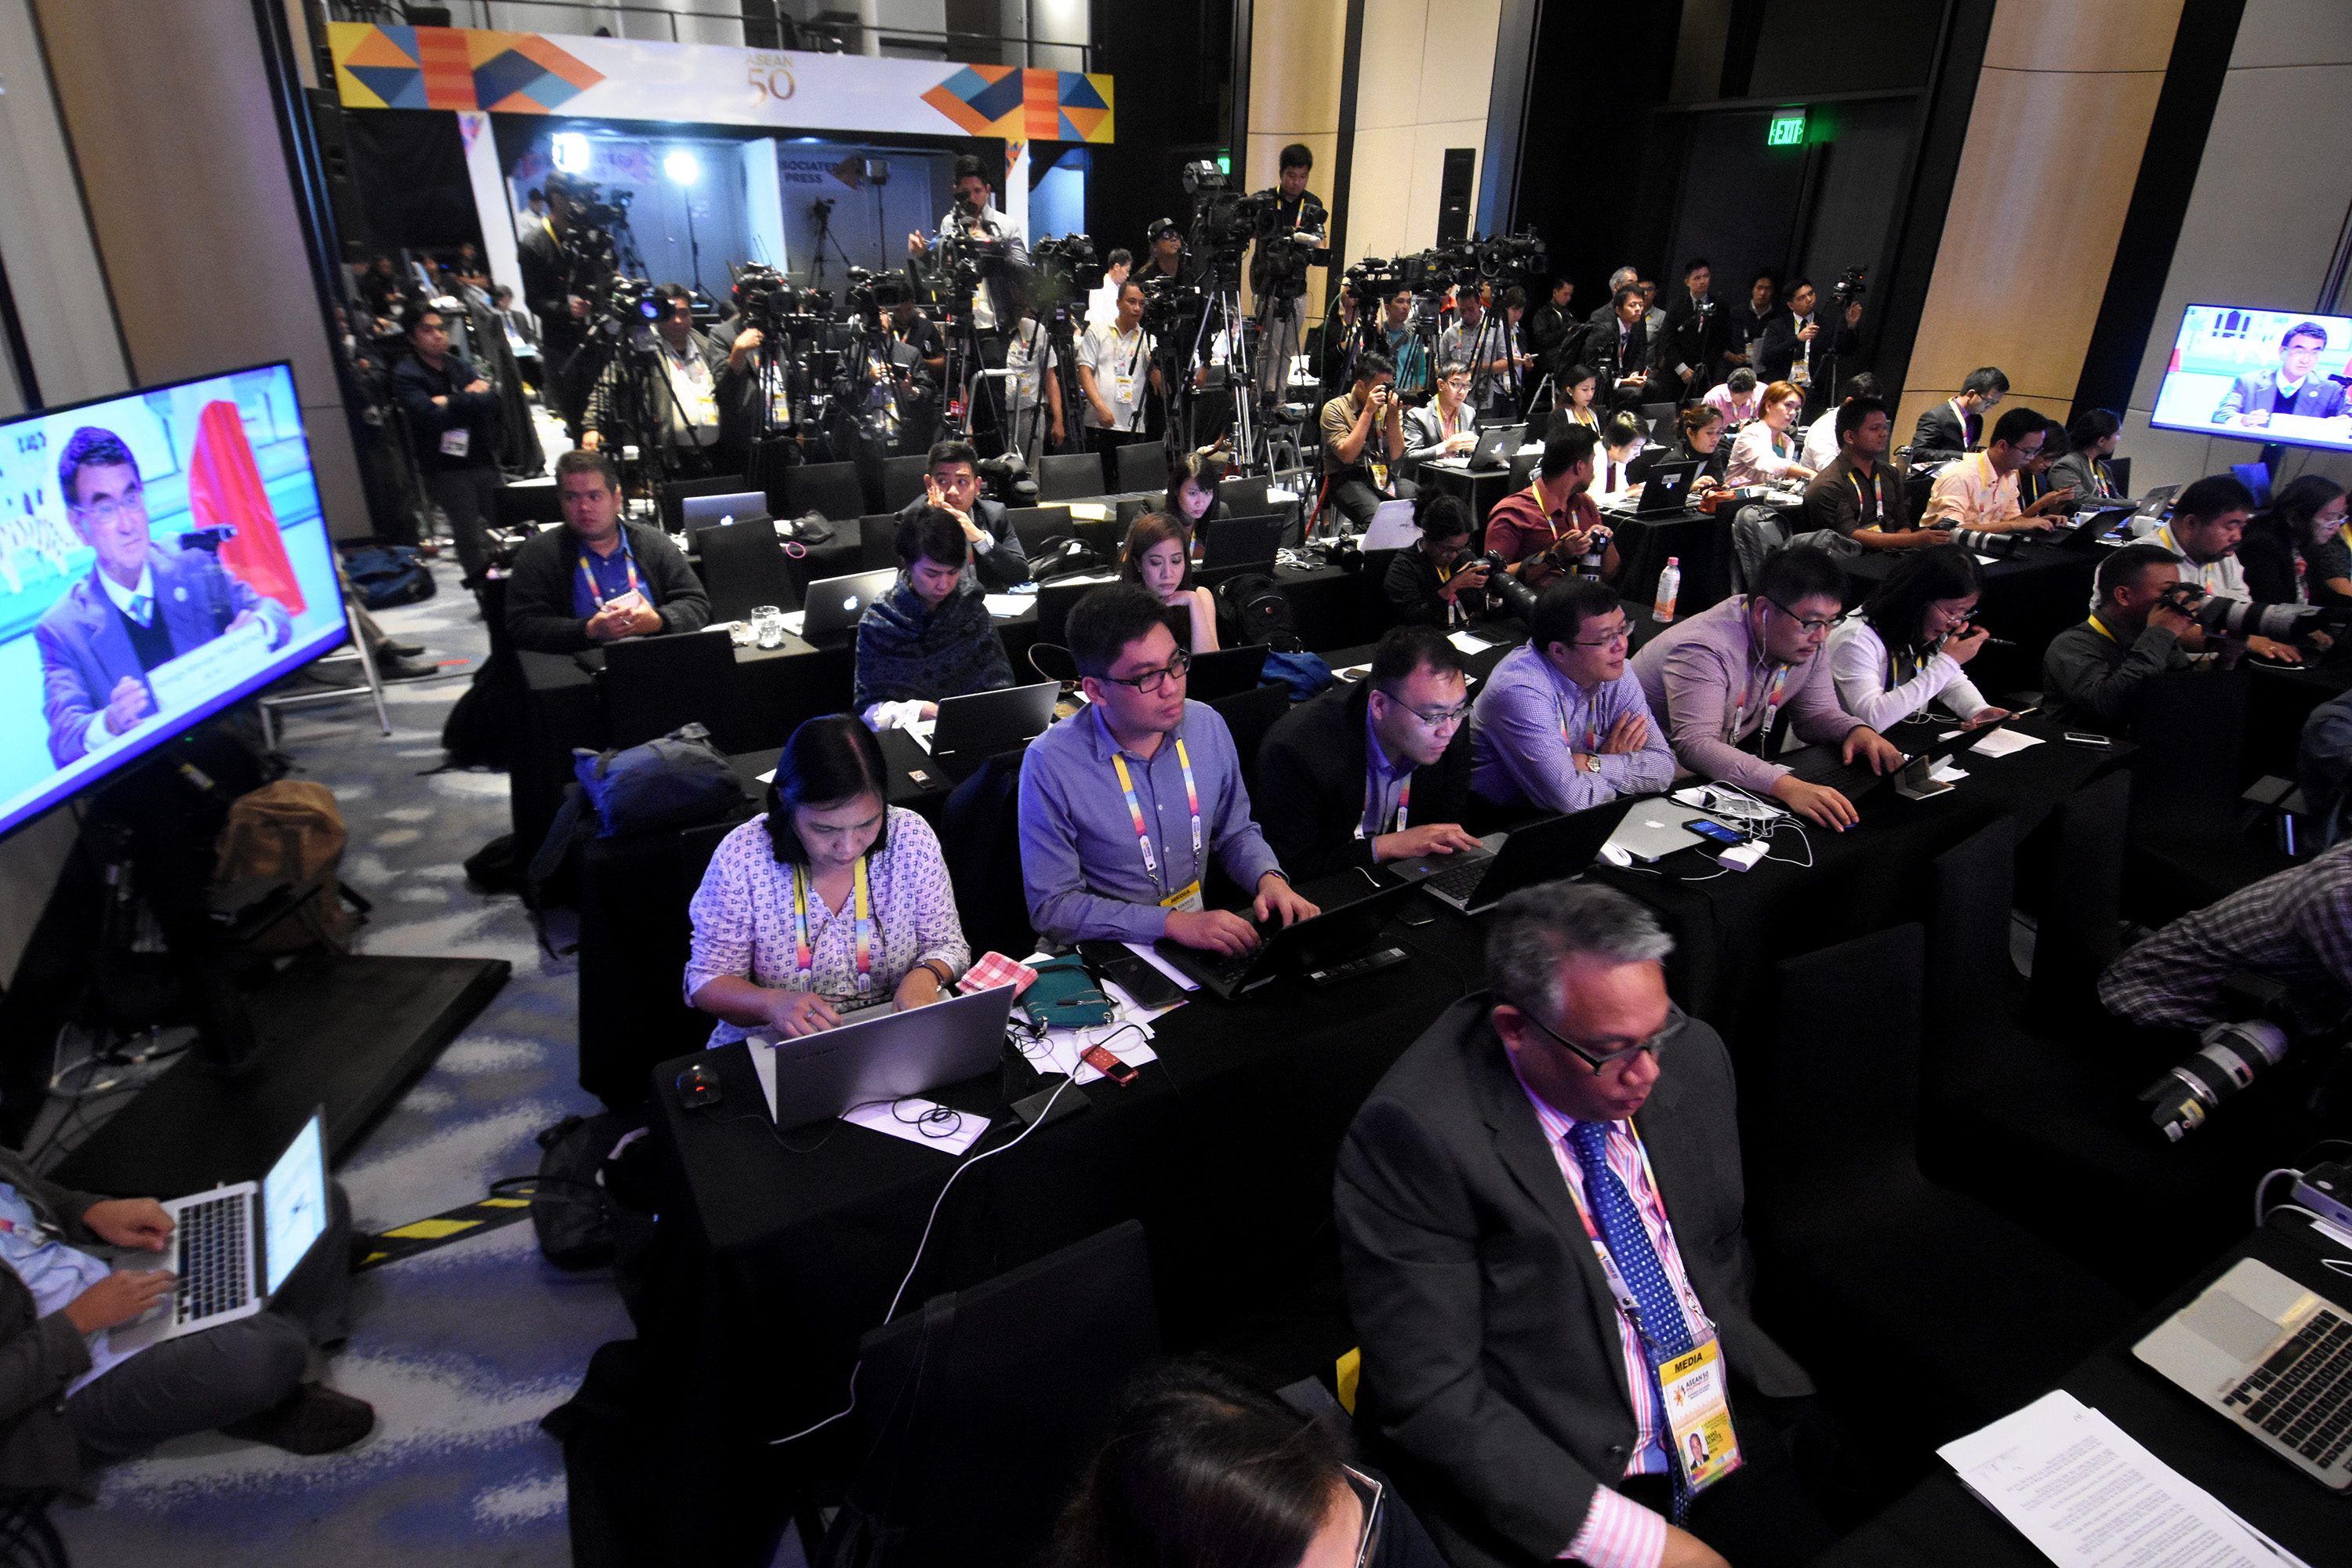 9 PM PRESS CON. Journalists attend a press conference – at 9 pm – by Japanese Foreign Minister Taro Kono at the International Media Center in Conrad Manila. Photo by Angie de Silva/Rappler  